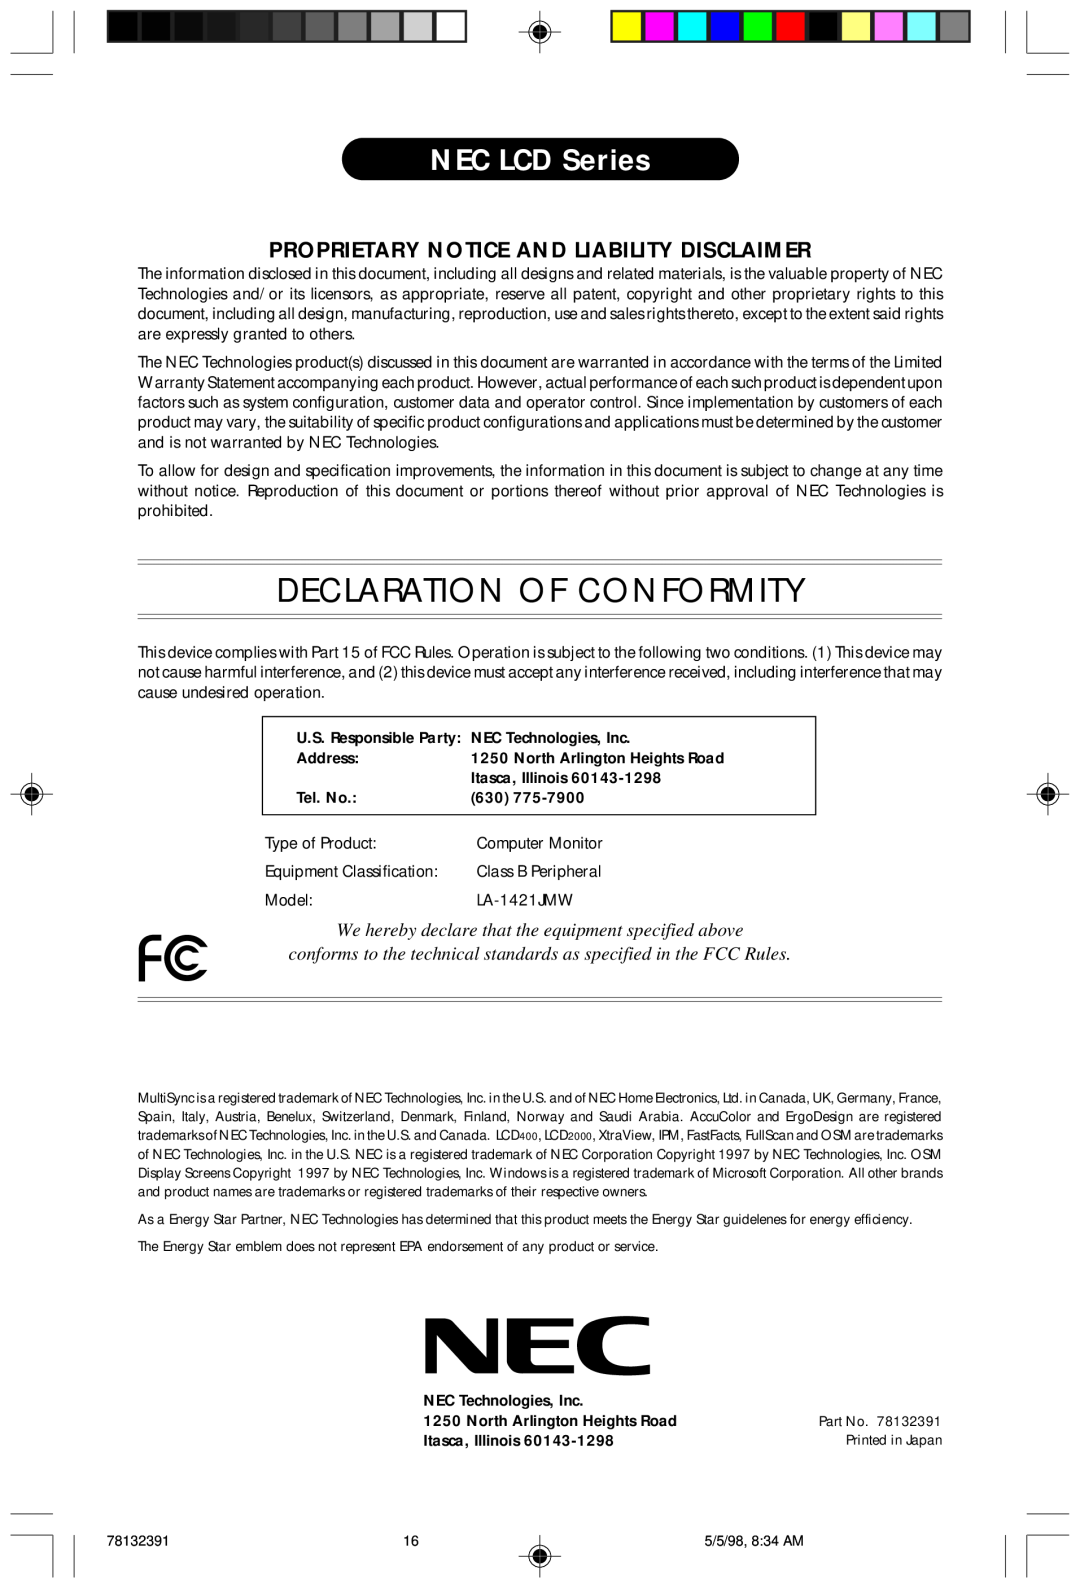 NEC LCD2000 user manual Declaration Of Conformity, NEC LCD Series, Proprietary Notice And Liability Disclaimer 